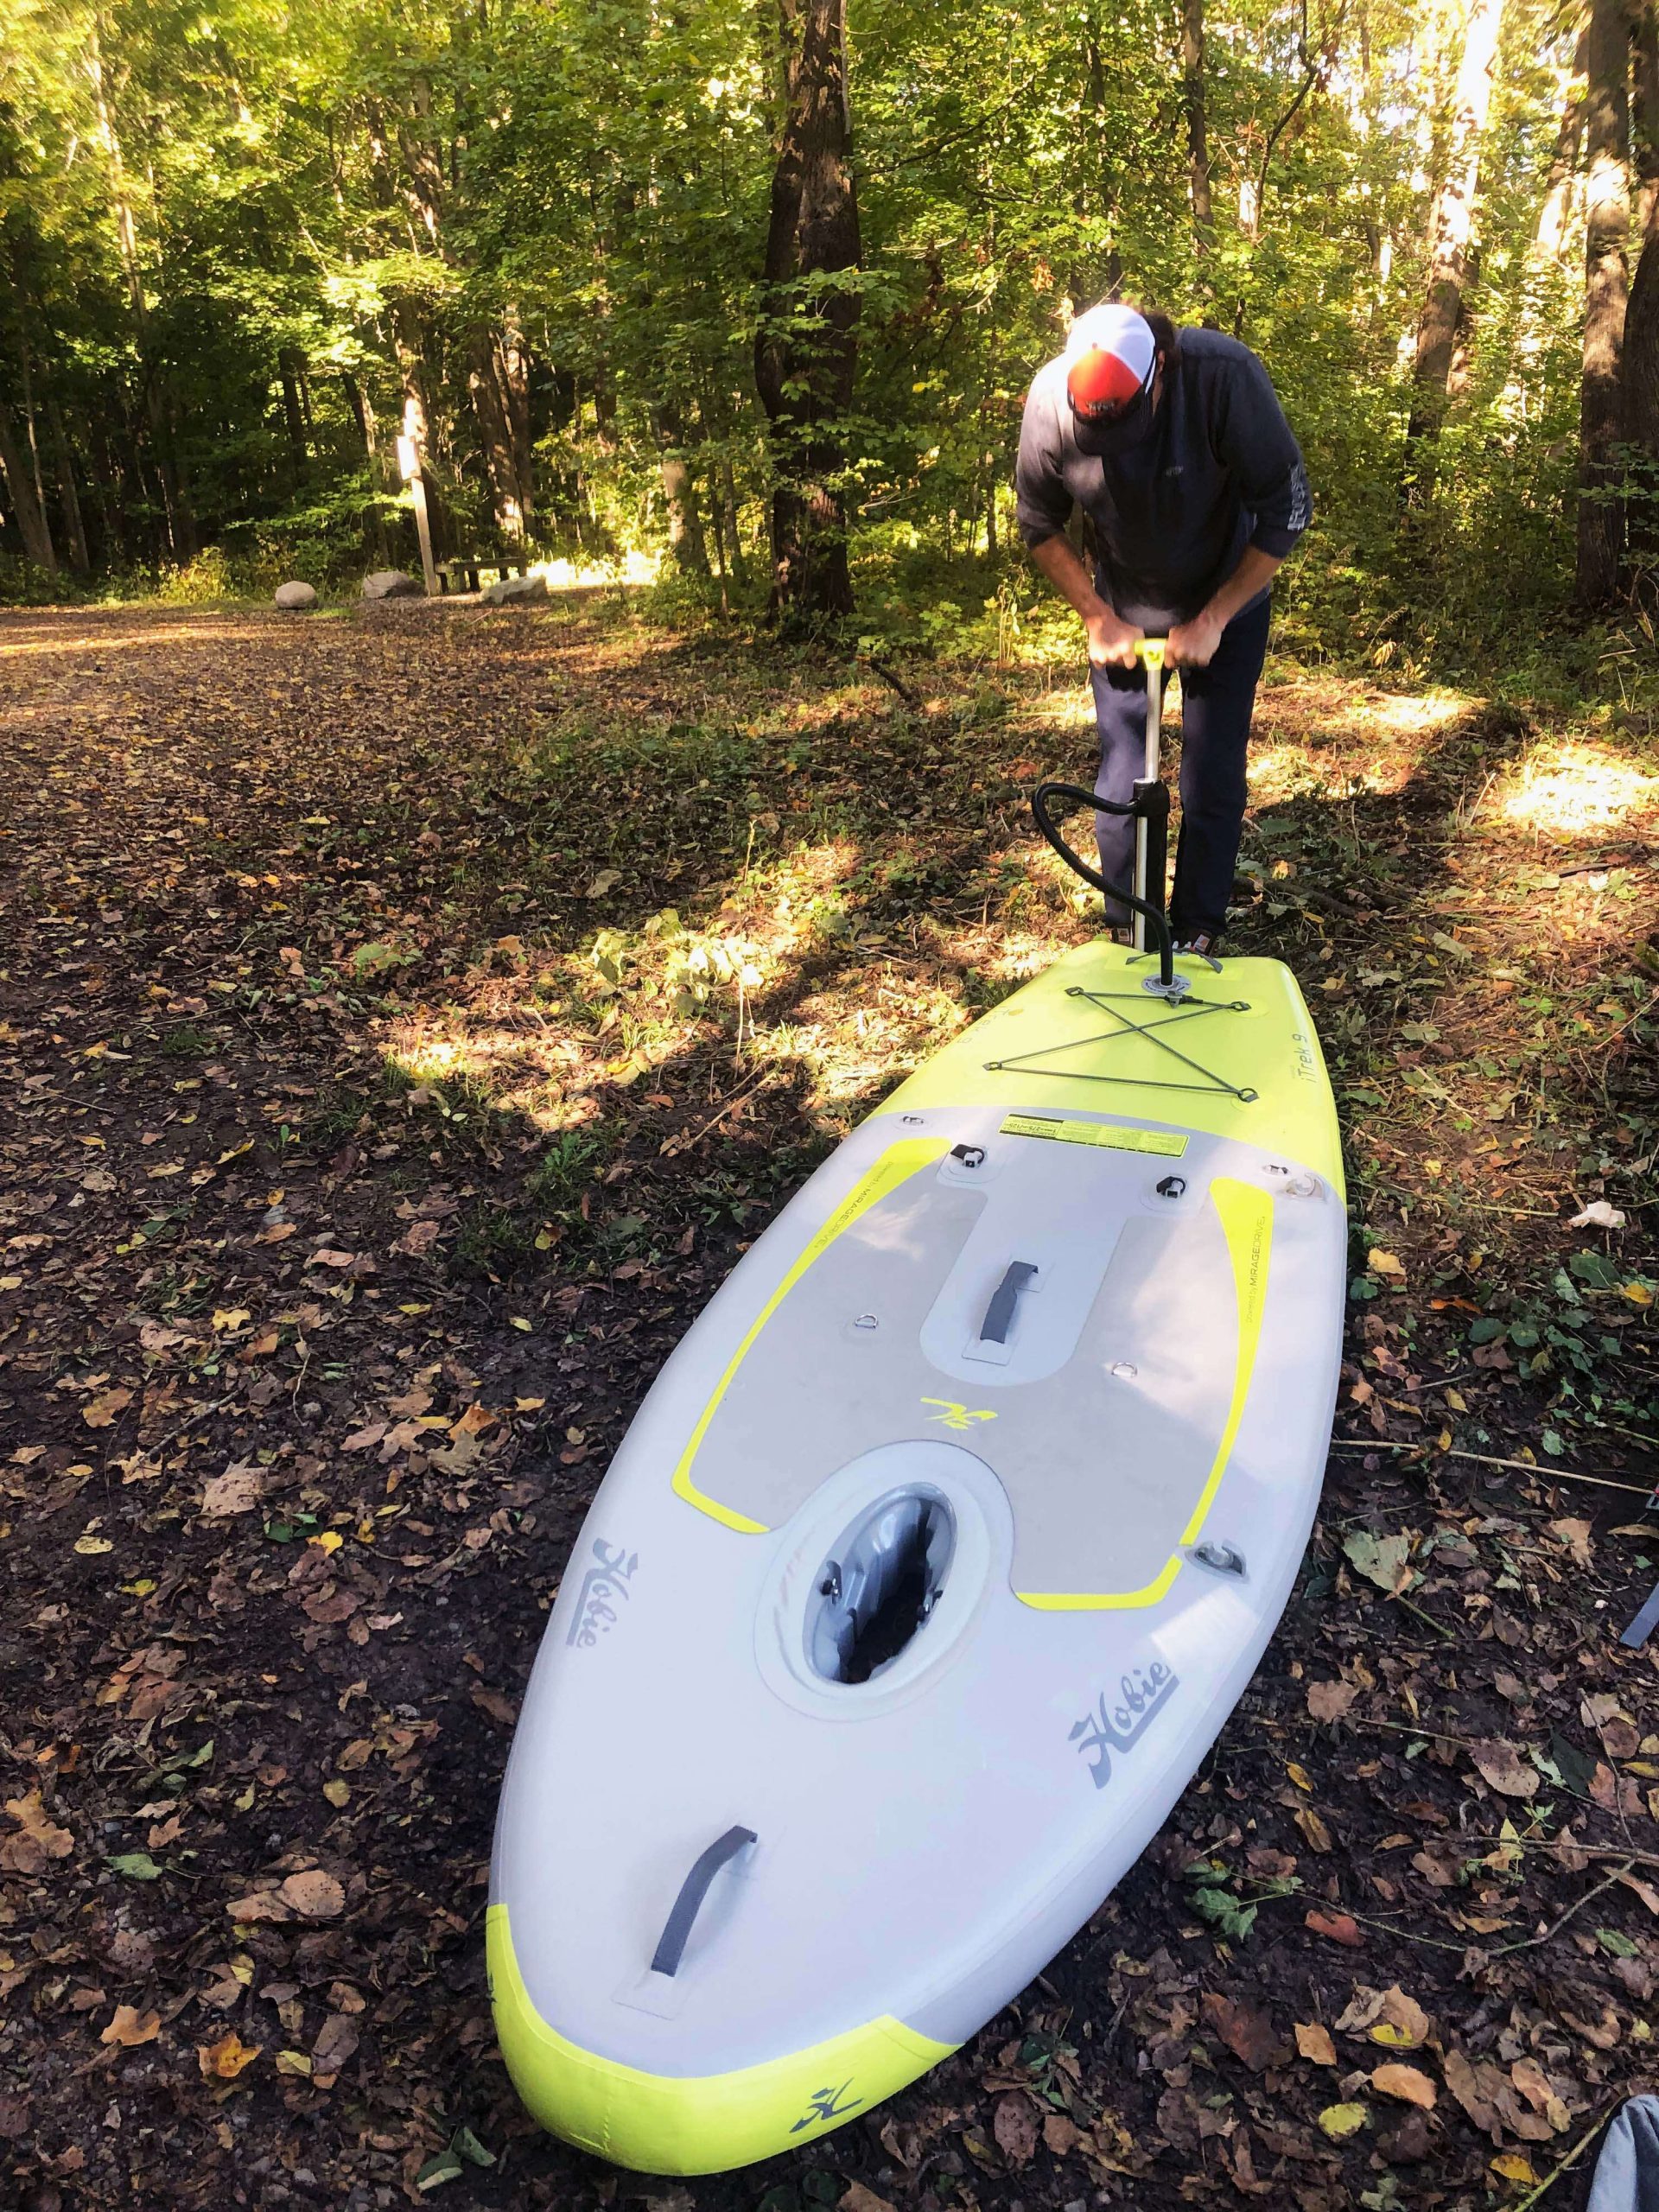 Hobie’s pump makes quick work of inflating the iTrek, which is 9 feet, 5 inches long and 40 inches wide. The pump adds air both on the downstroke and the upstroke. Pumping, hooking down the chair and installing the rudder can be done in less than 10 minutes.
